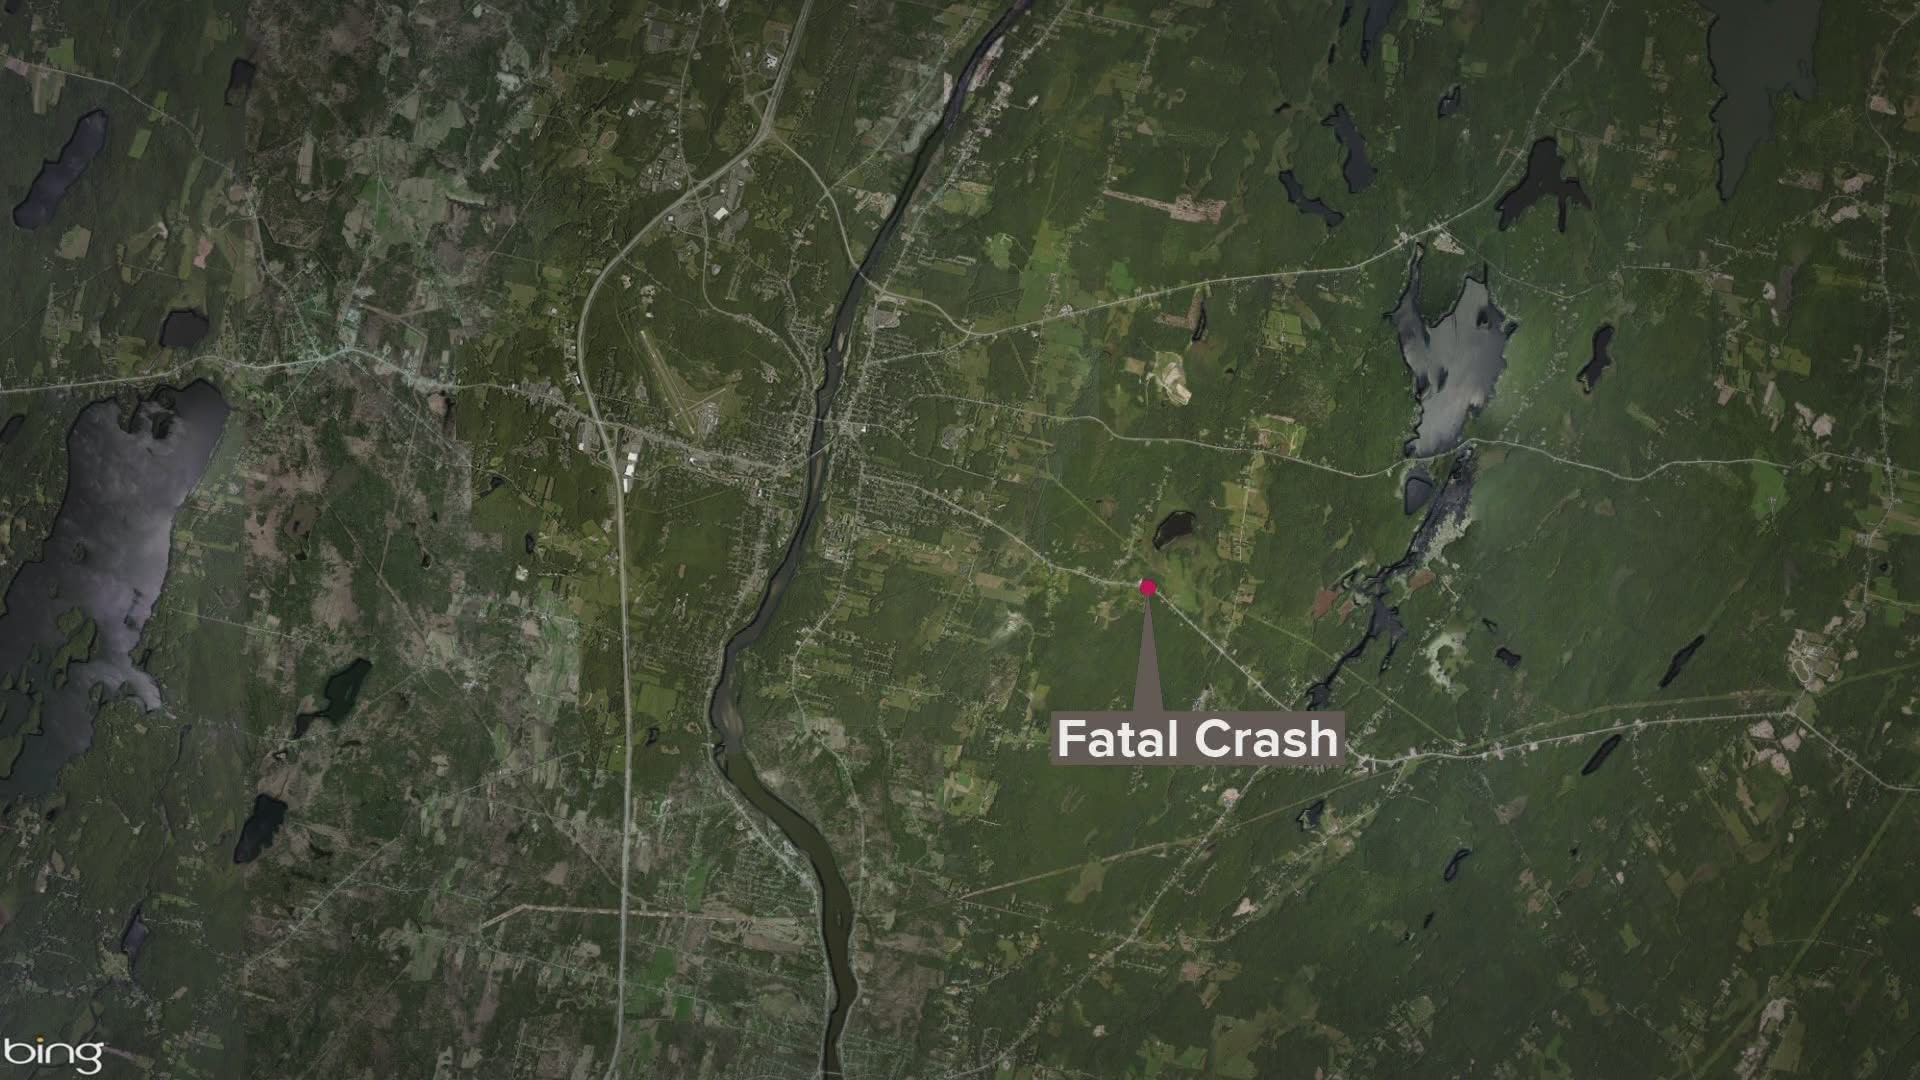 The Augusta Police Department is investigating a fatal car crash that took the lives of two Maine women.